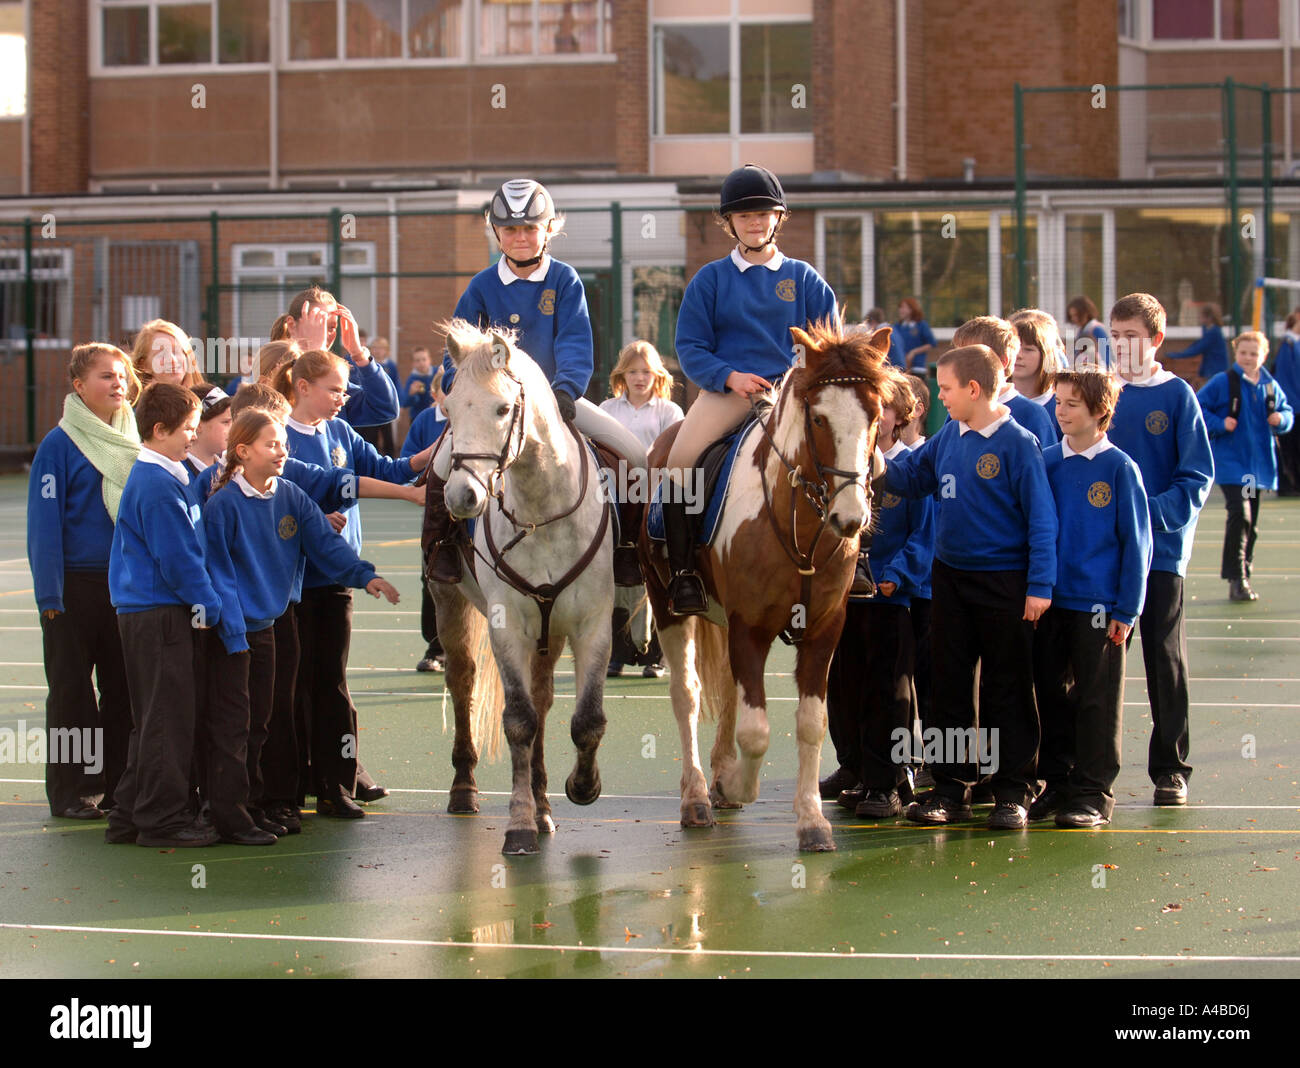 TWO SCHOOL GIRLS ON HORSES IN A PLAYGROUND AT A JUNIOR SCHOOL SOMERSET UK Stock Photo